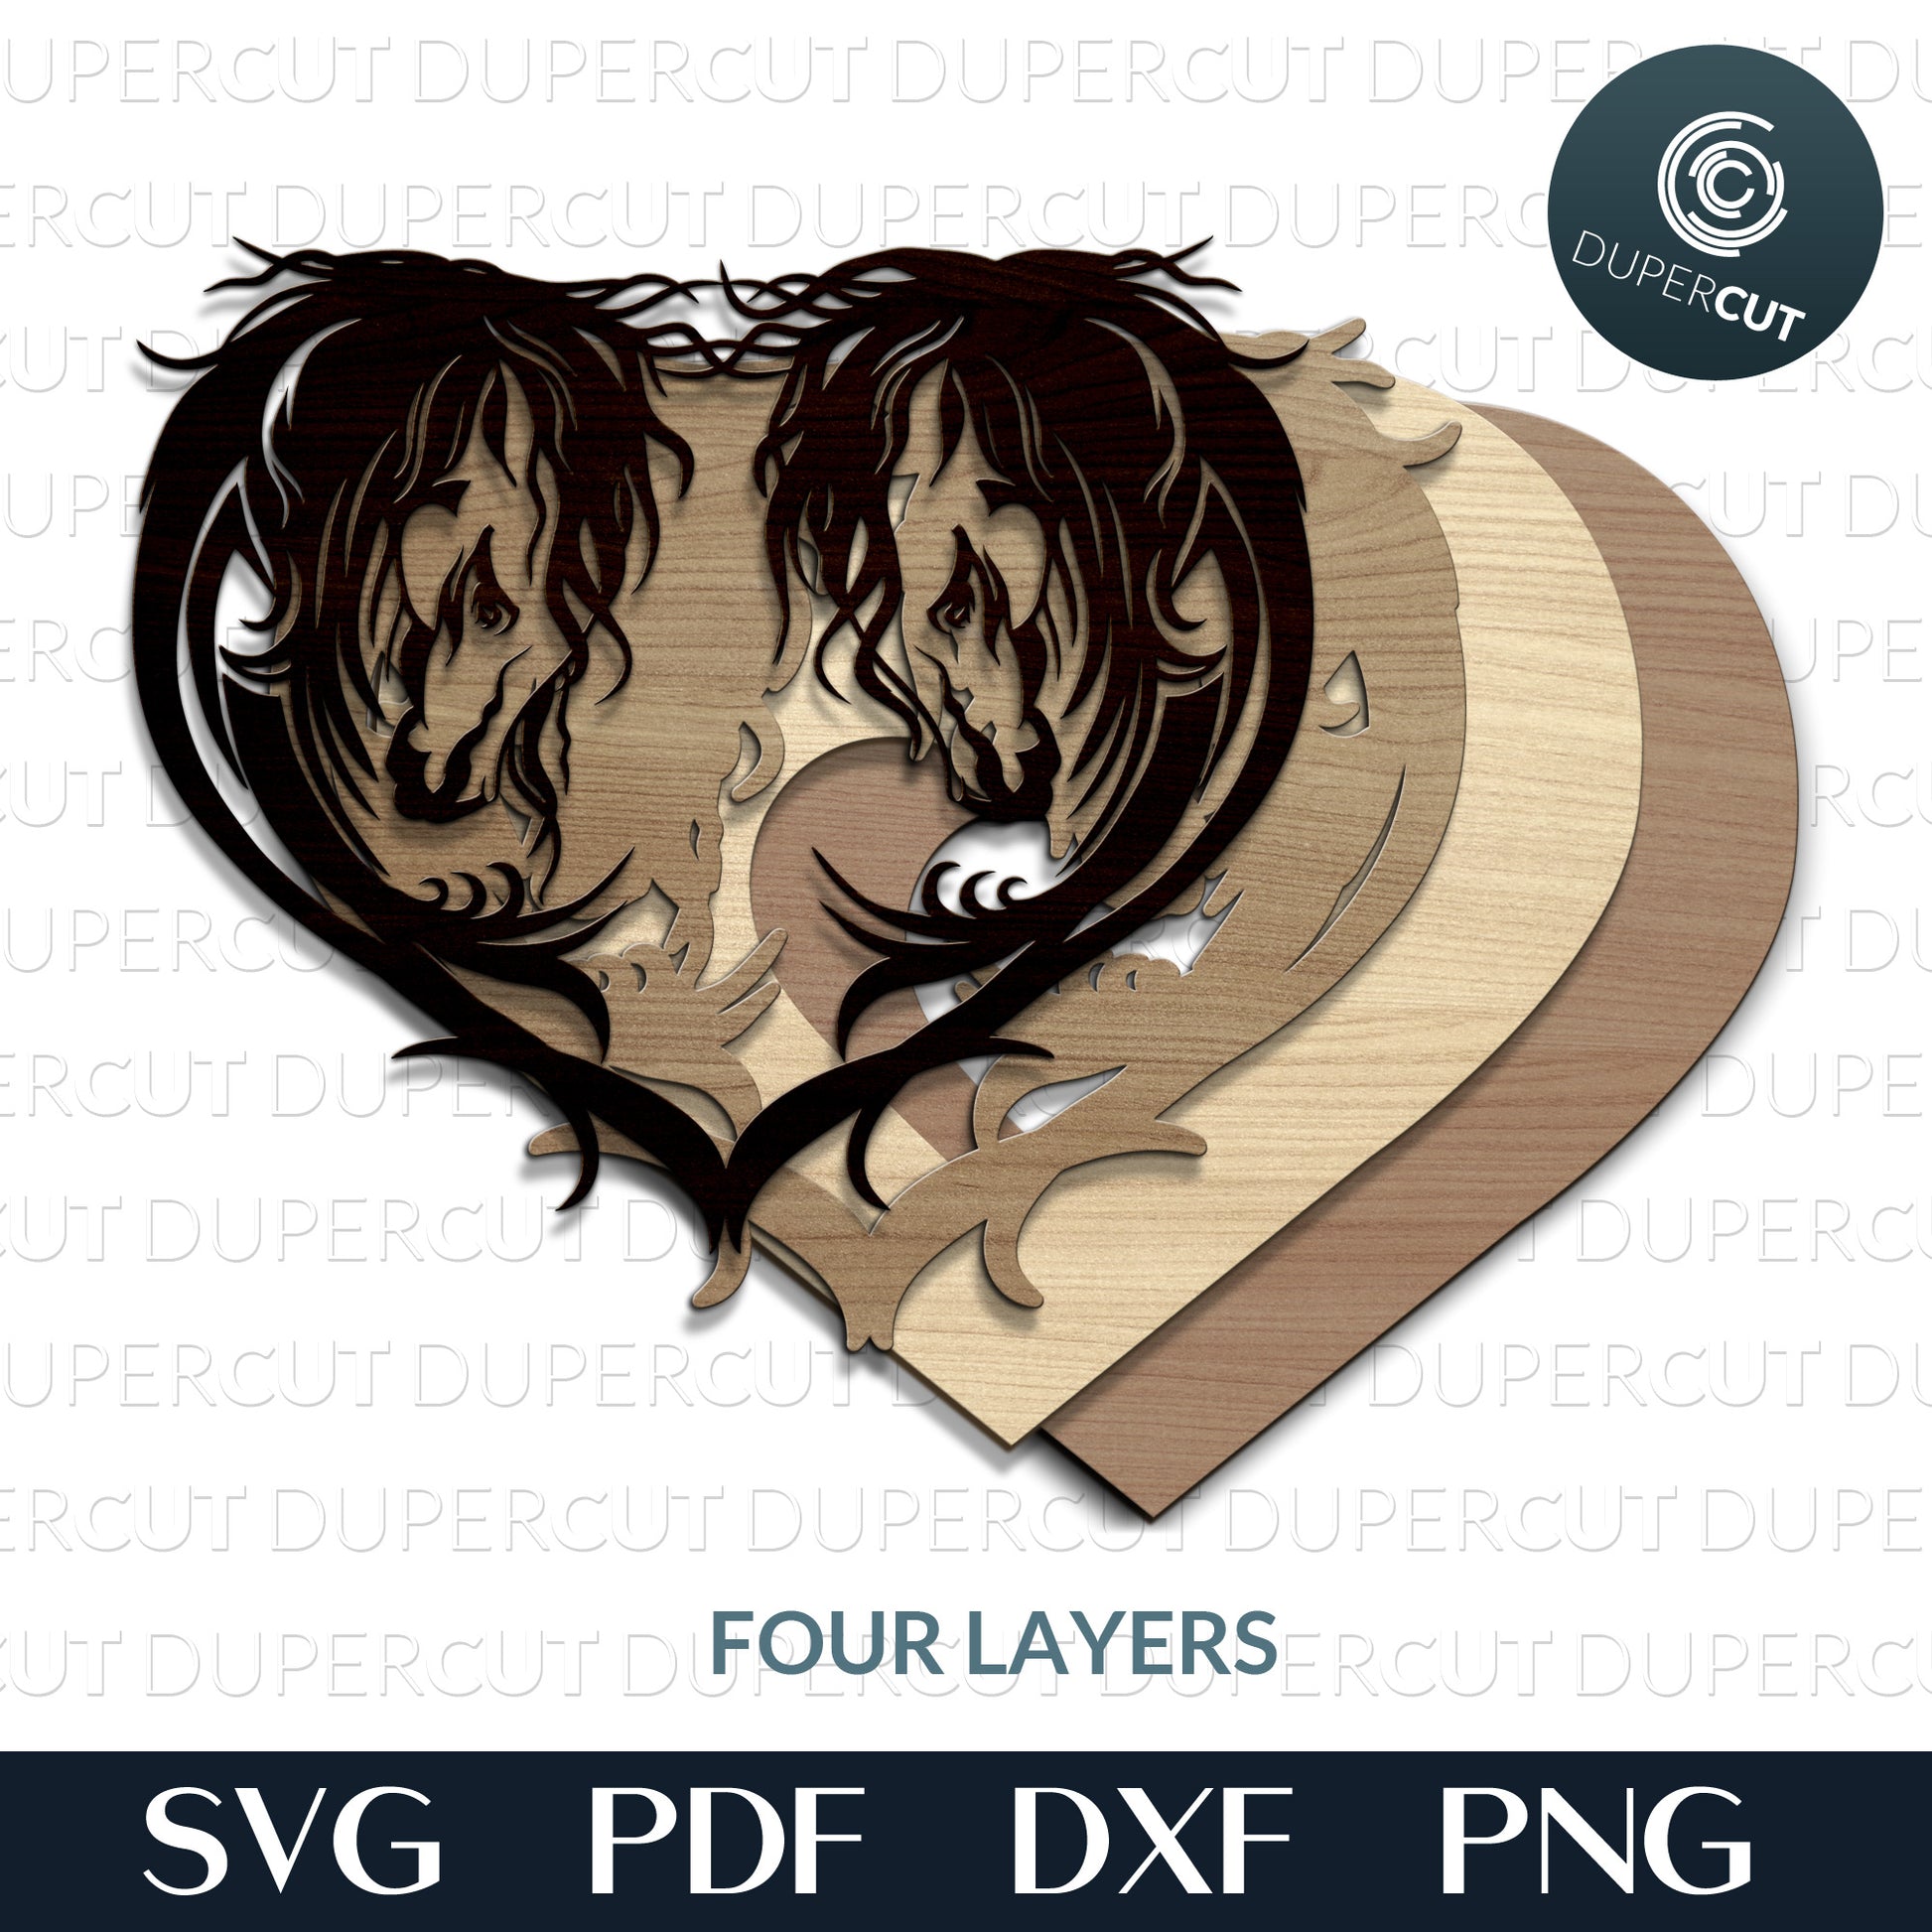 Horses in shape of heart, layered files, SVG PNG DXF files for cutting, laser engraving, scrapbooking. For use with Cricut, Glowforge, Silhouette, CNC machines.